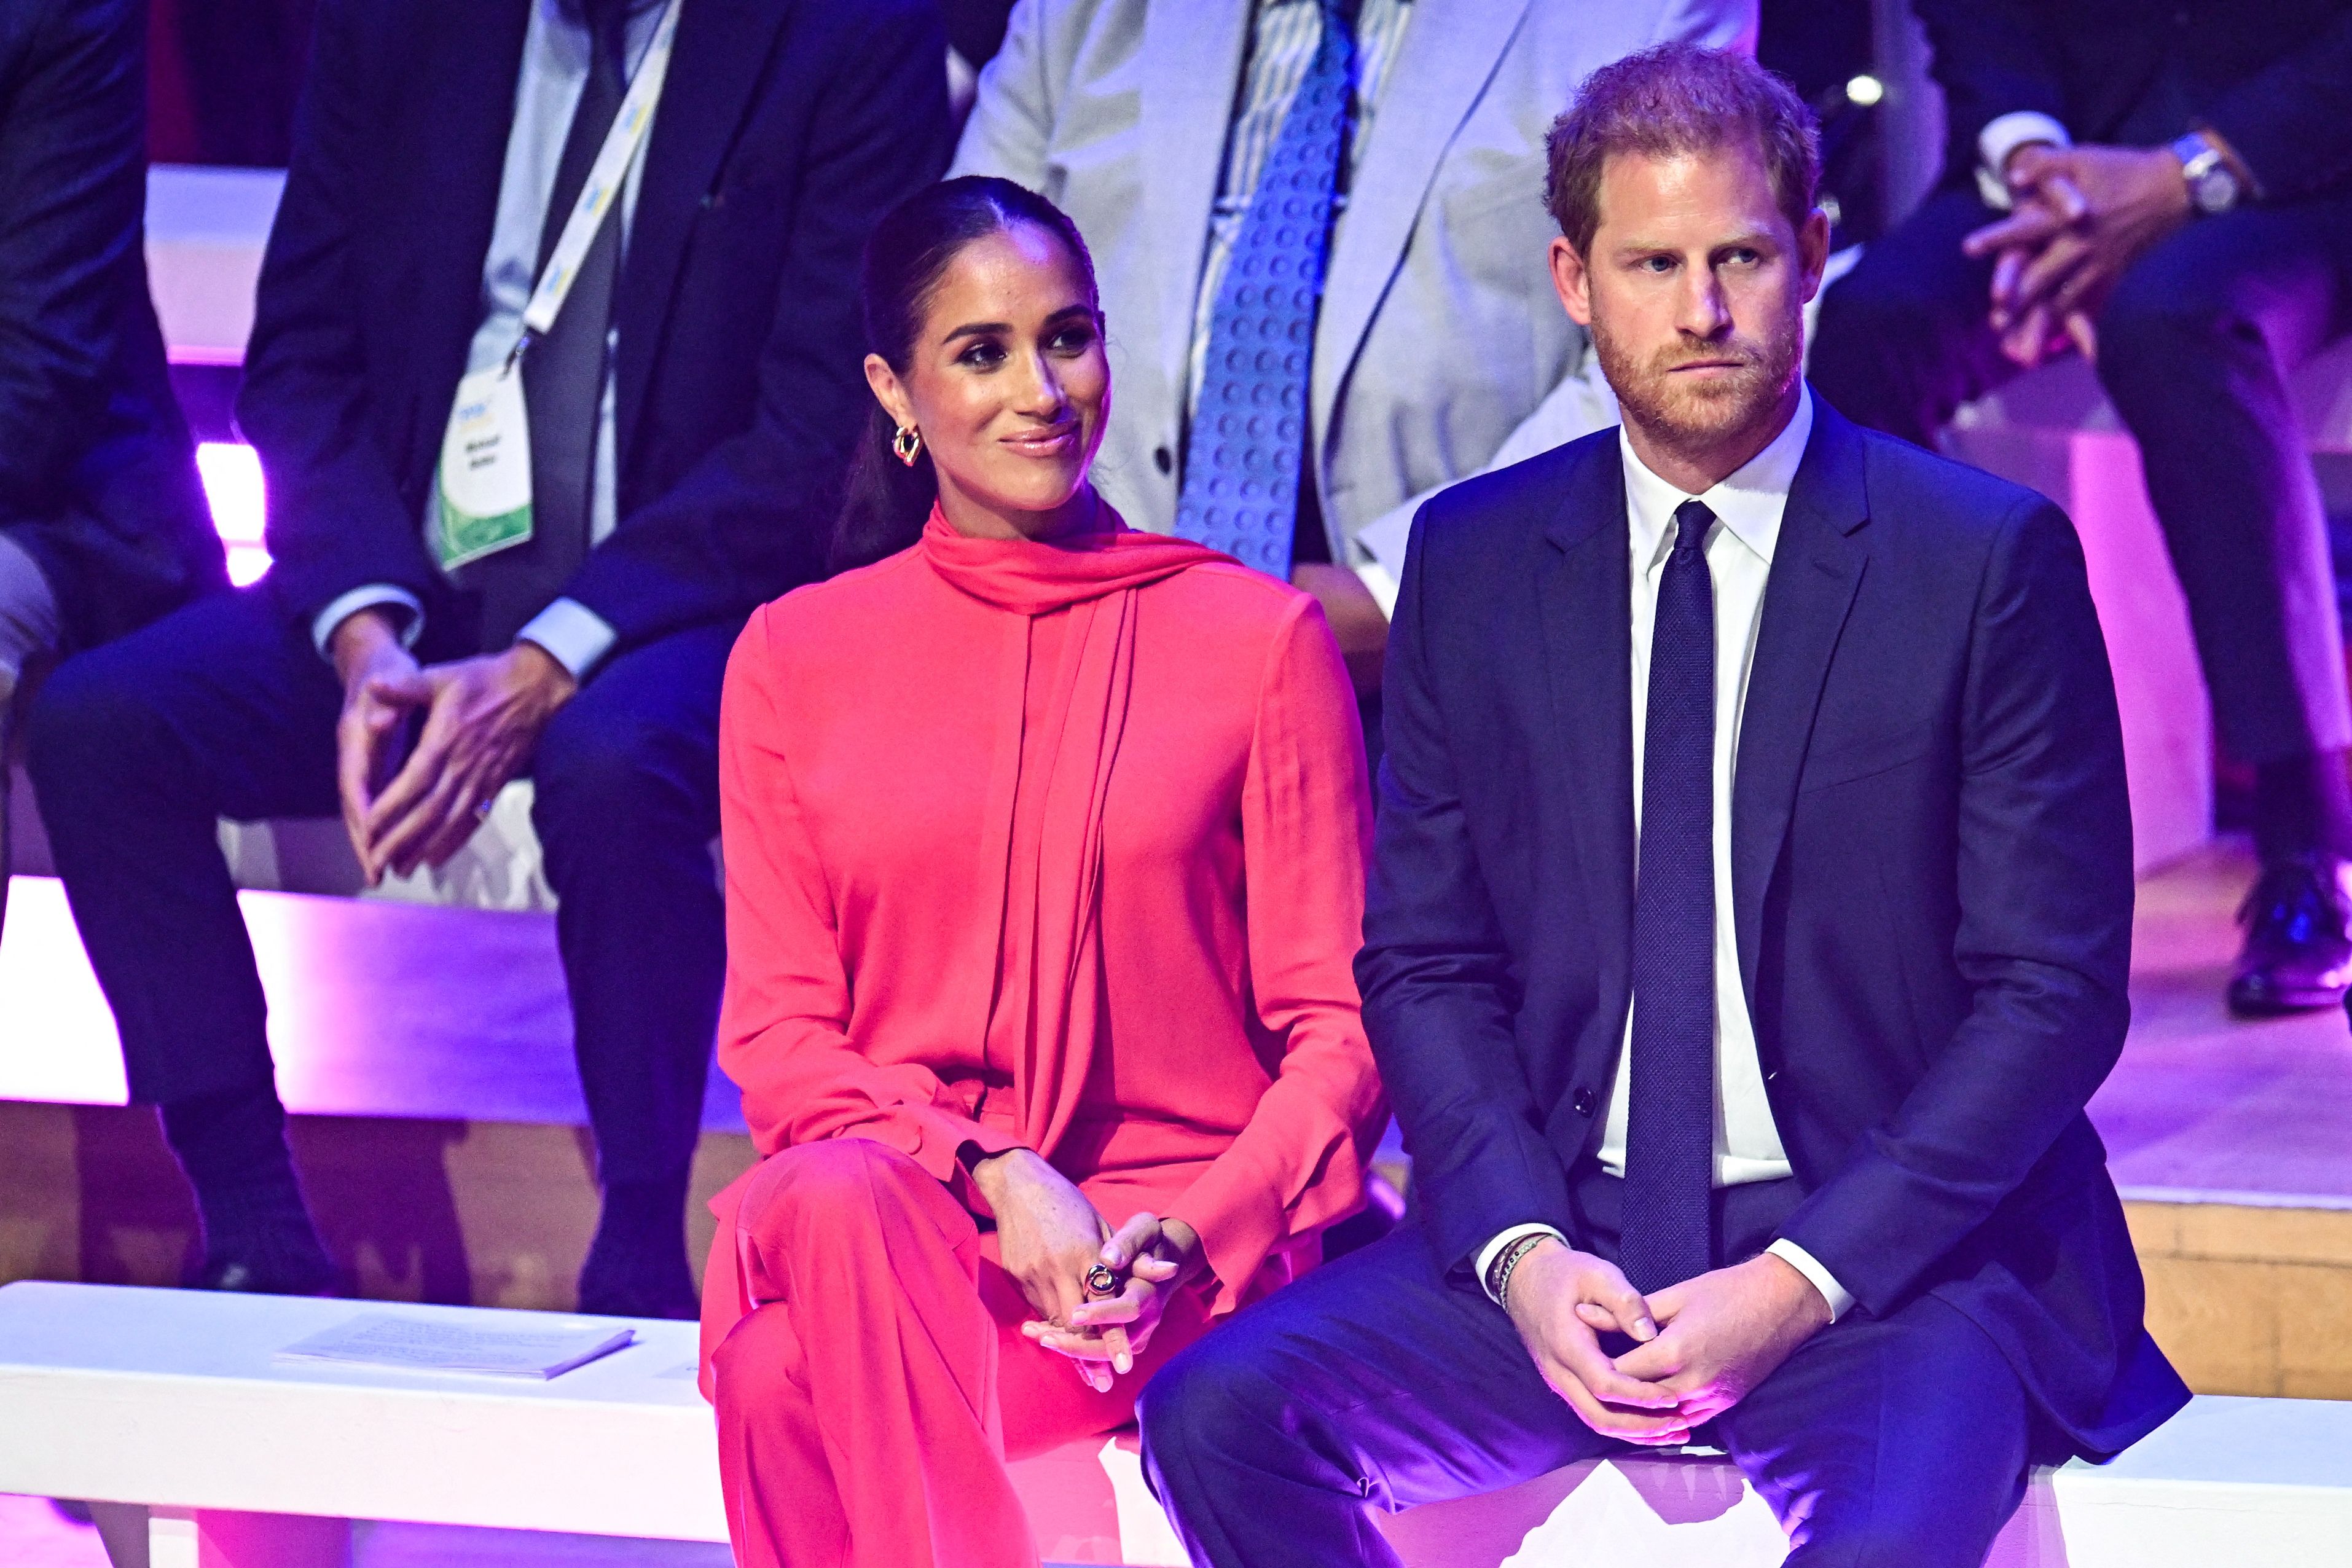 Meghan, Duchess of Sussex, and Prince Harry, Duke of Sussex, attend the annual One Young World Summit at Bridgewater Hall in Manchester, north-west England, on September 5, 2022. | Source: Getty Images